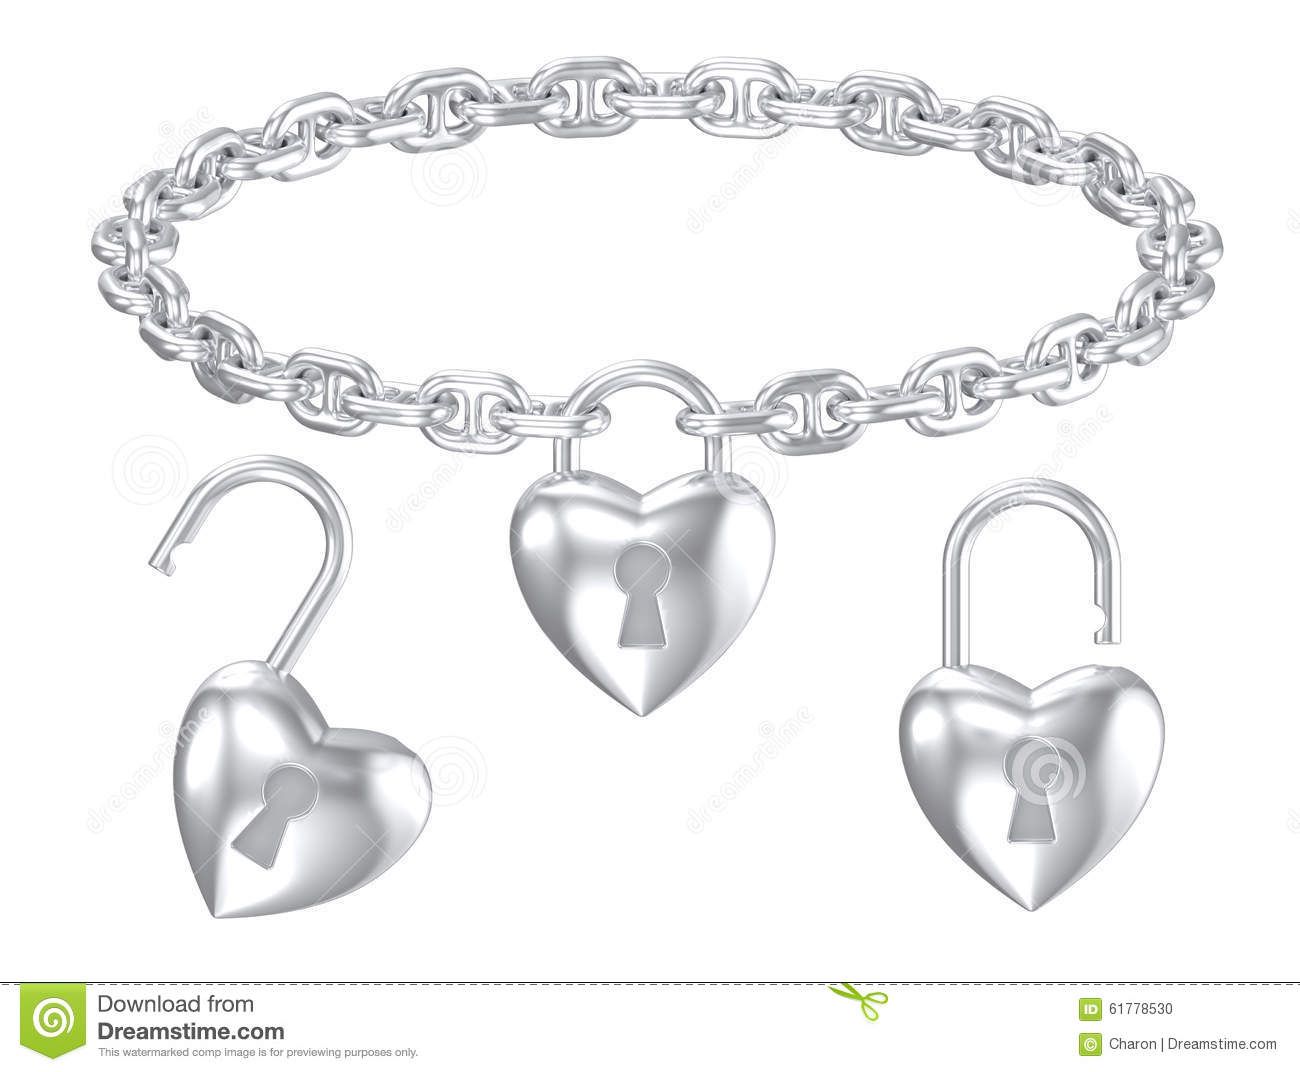 Silver Heart Lock Pendant Isolated Necklace Stock Photo With Regard To Most Popular Heart Shaped Padlock Necklaces (View 16 of 25)